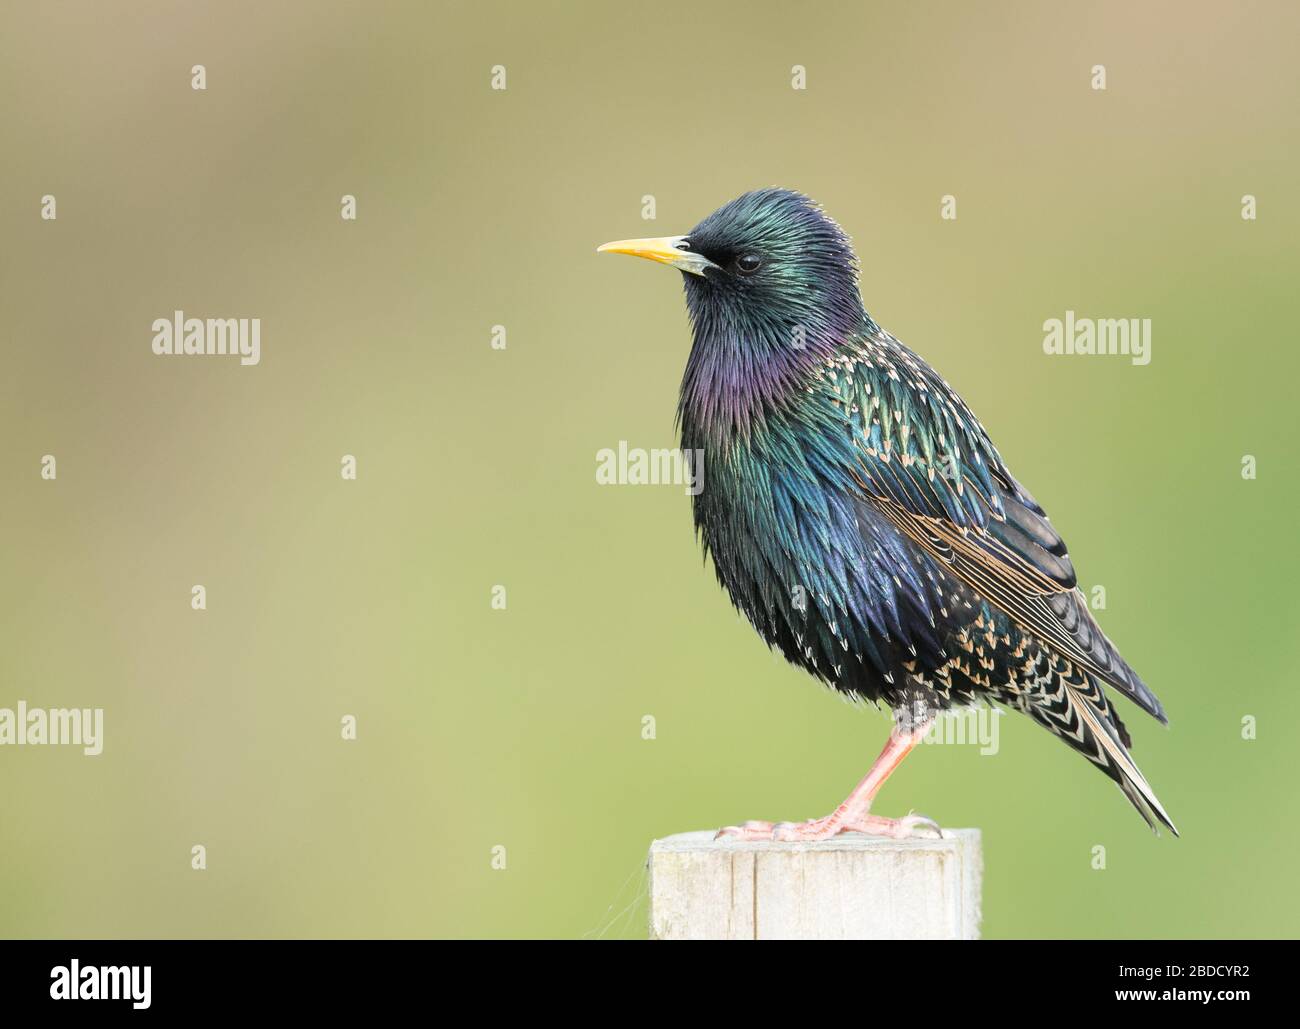 An adult Starling (Sturnidae) in breeding plumage against a clean background. Taken in Blunsdon, Swindon, Wiltshire. Stock Photo